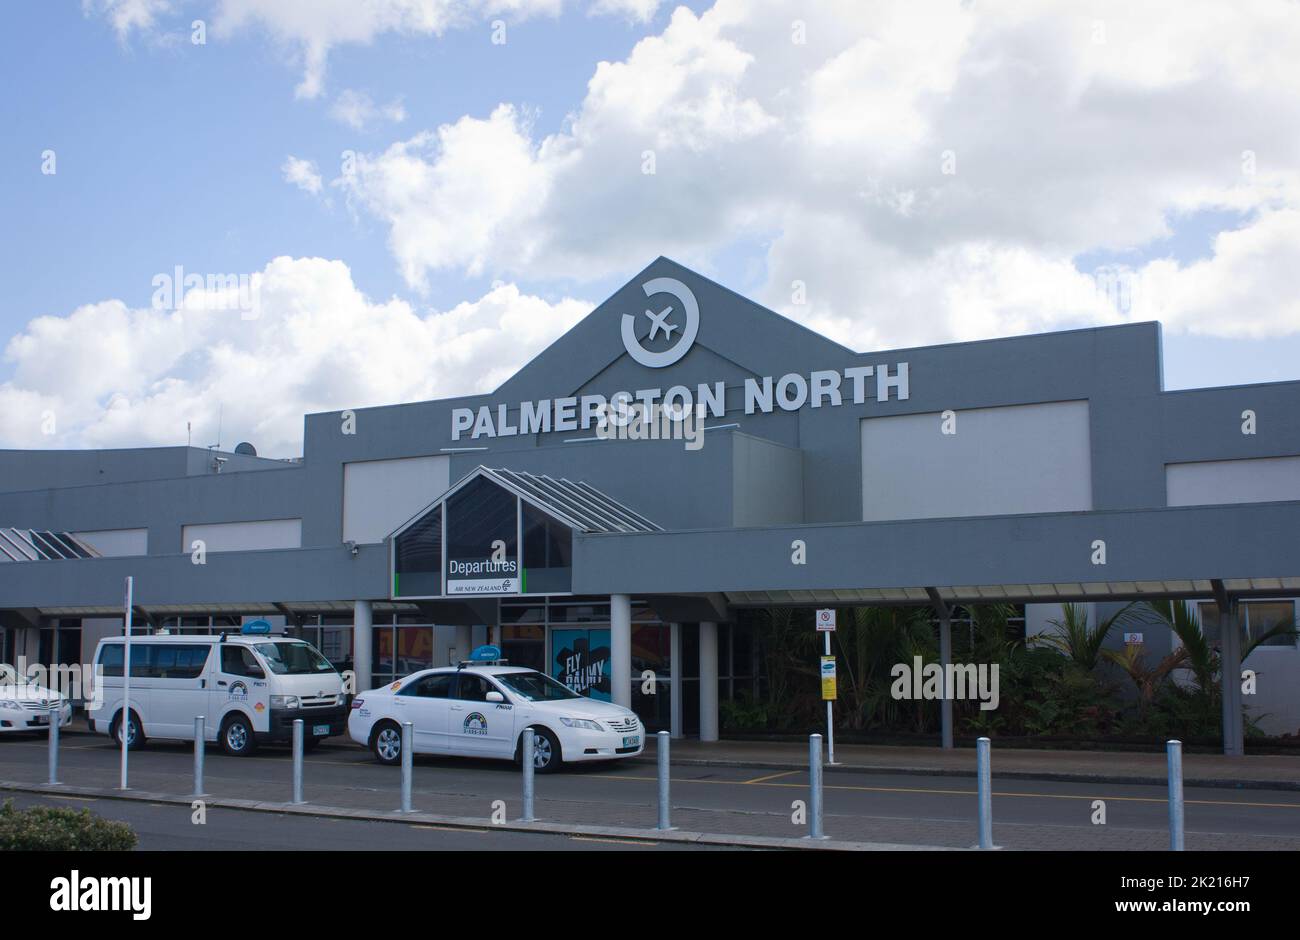 Palmerston North, New Zealand - September 19th 2017: Palmerston North airport. Stock Photo